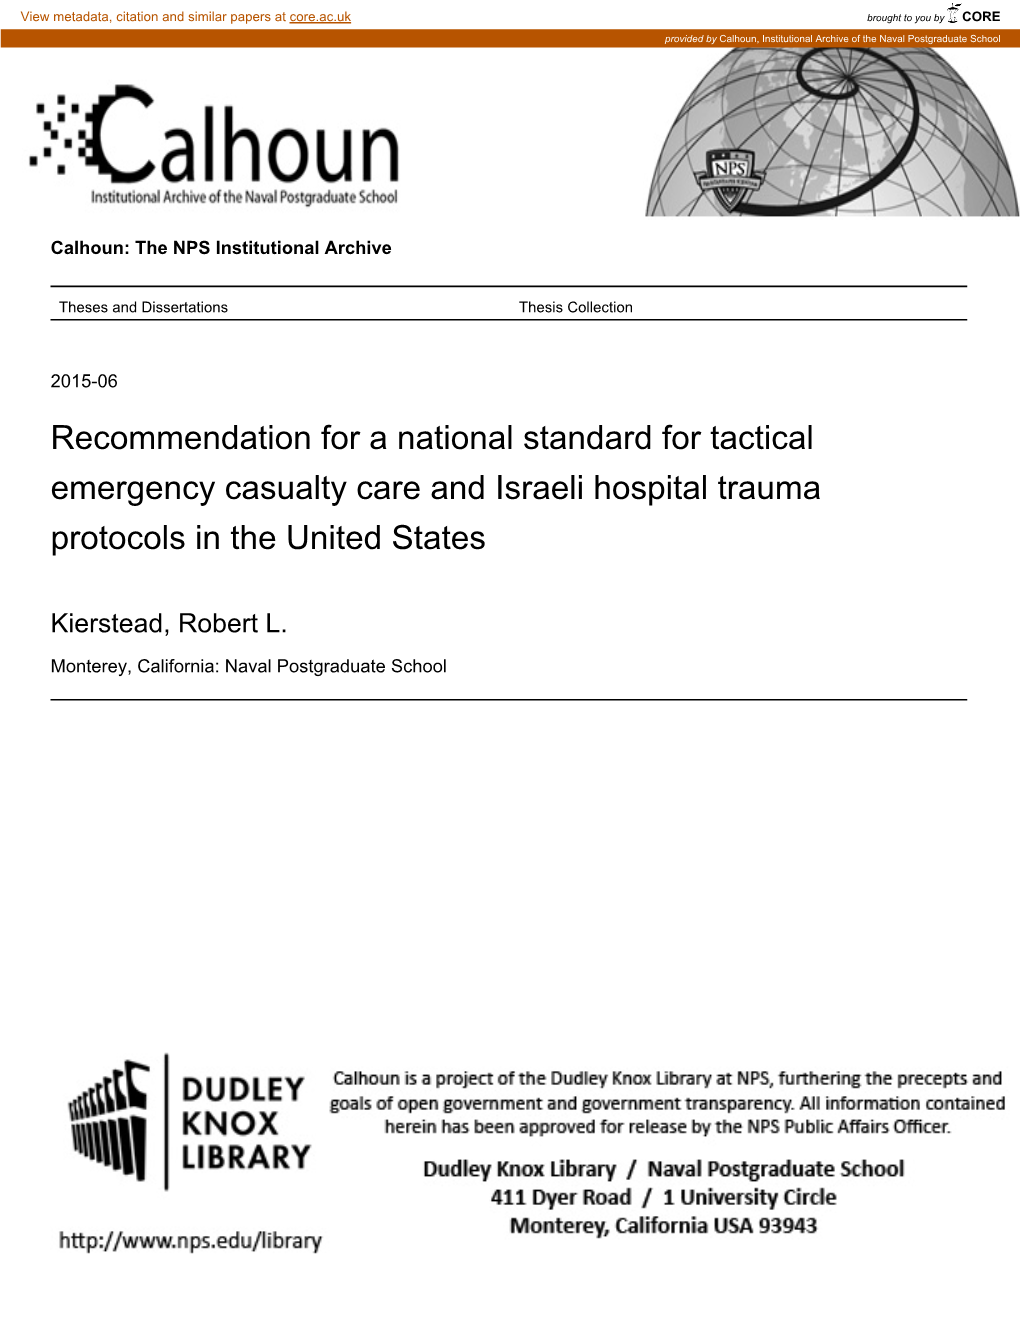 Recommendation for a National Standard for Tactical Emergency Casualty Care and Israeli Hospital Trauma Protocols in the United States